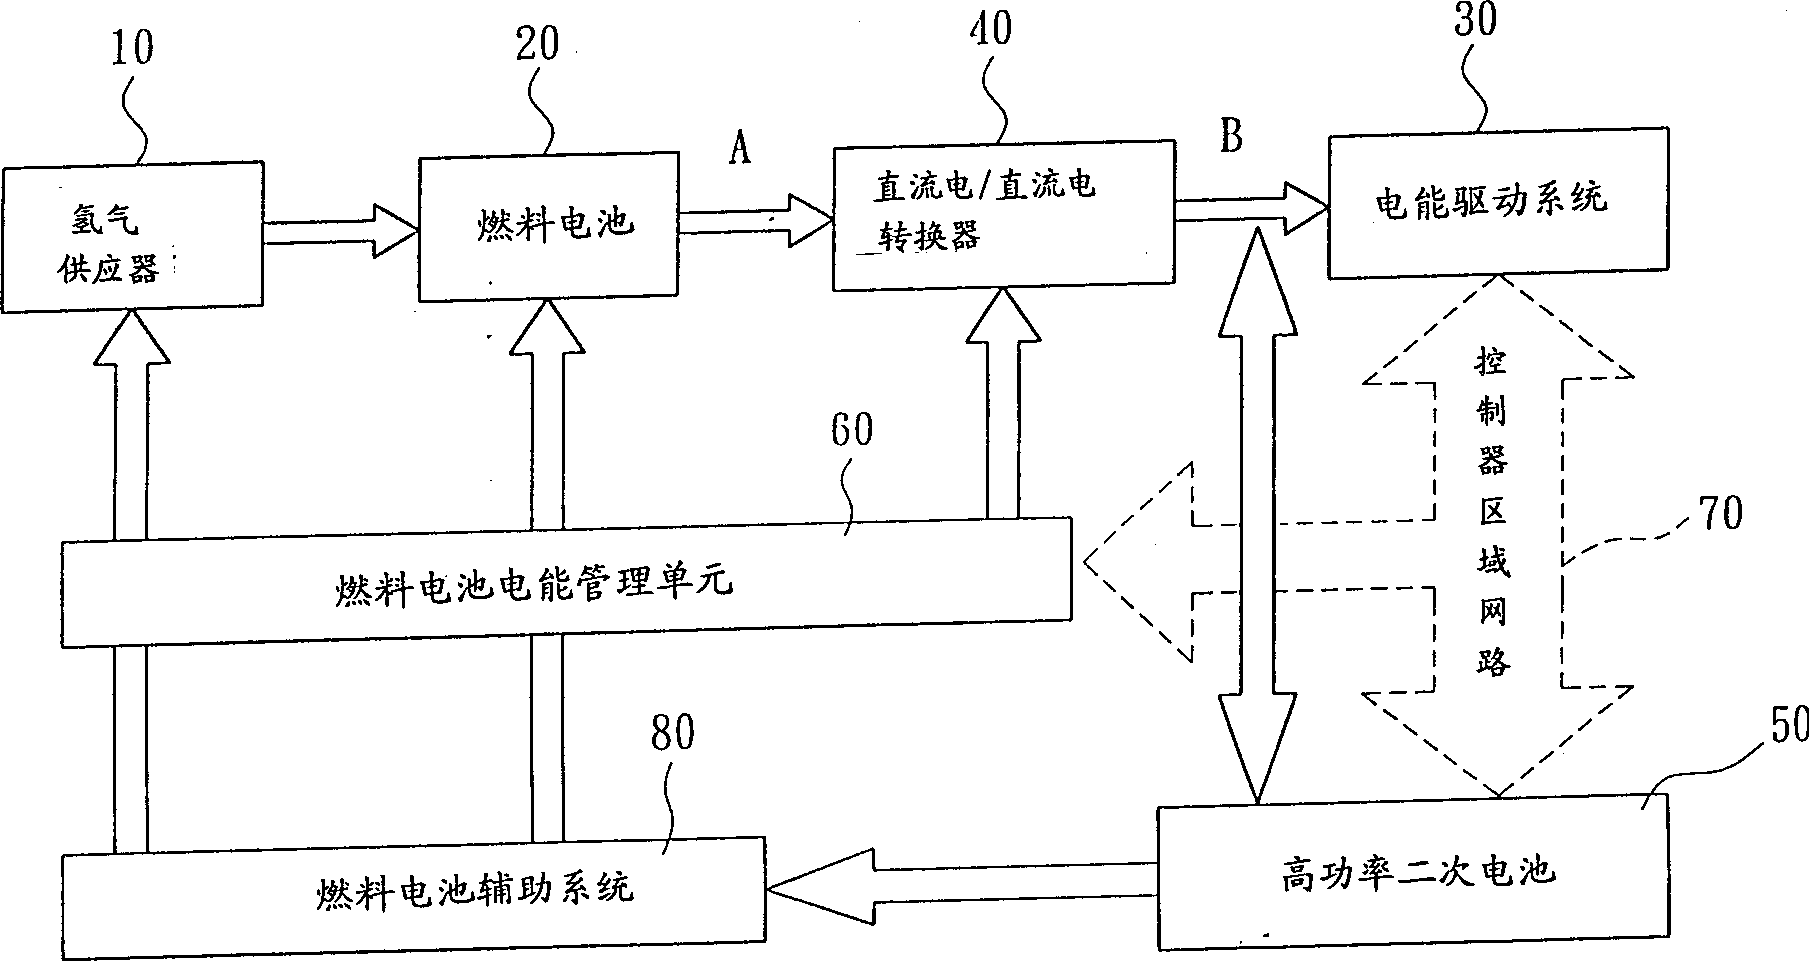 Electric power output control system for electric vehicle with combined fuel battery